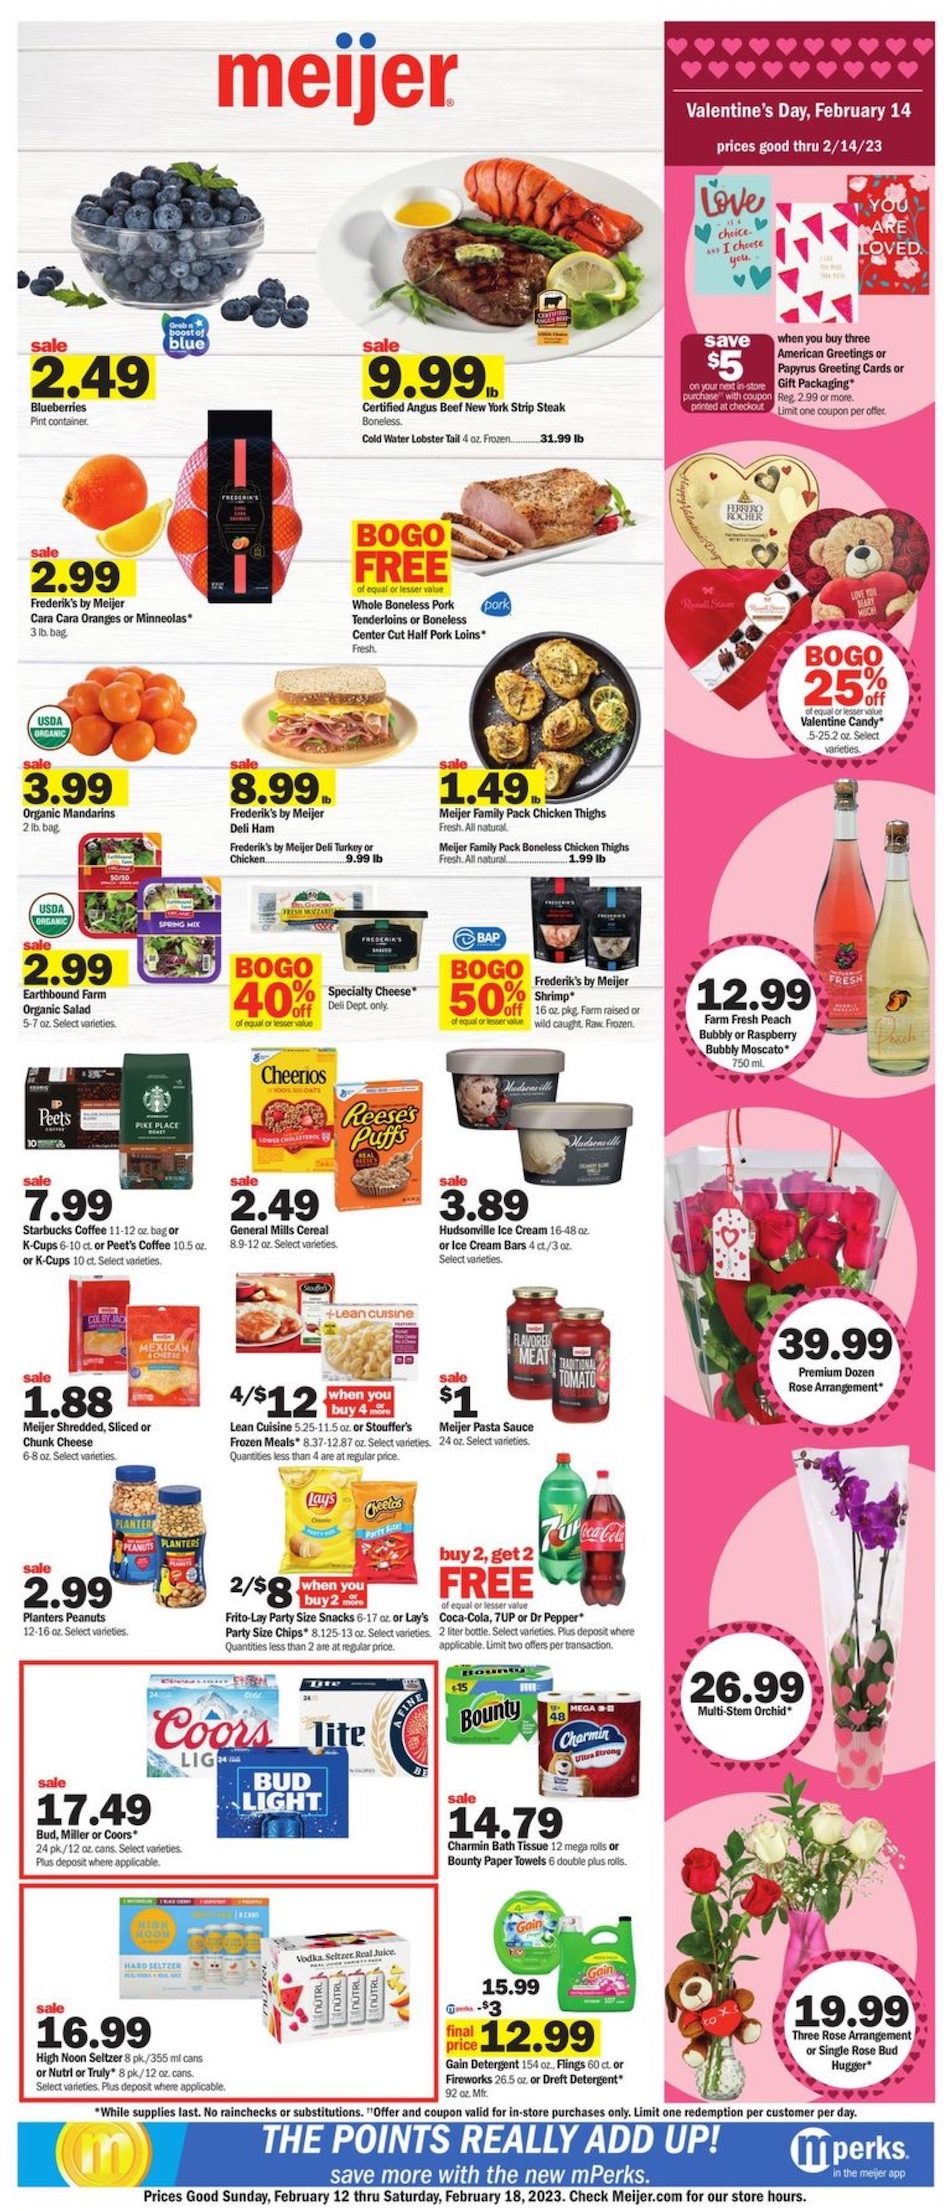 Meijer Weekly Ad Sale February 12th – 18th, 2023 Page 1